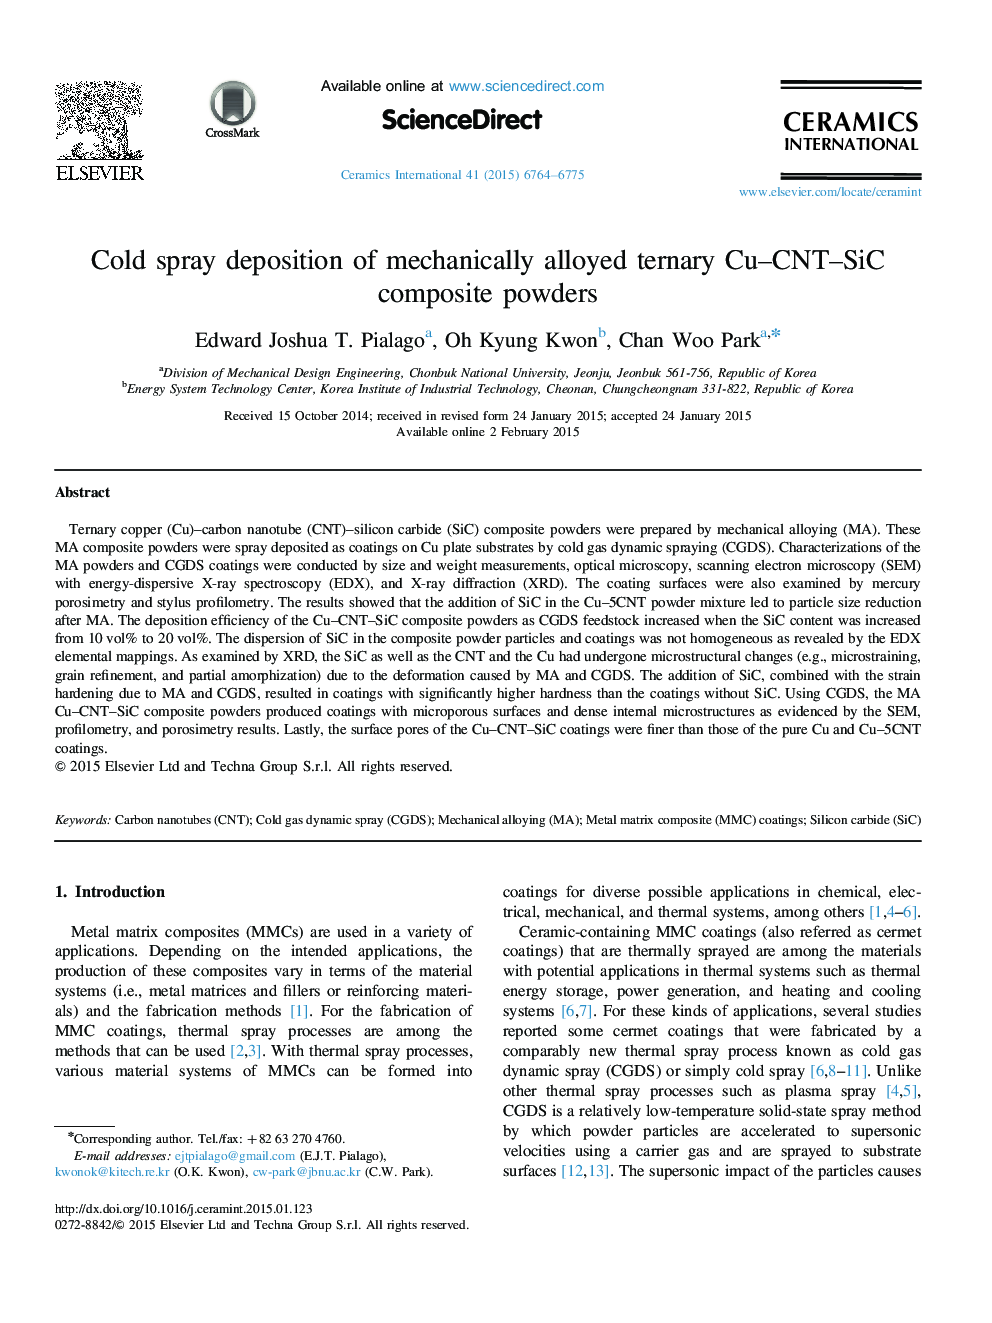 Cold spray deposition of mechanically alloyed ternary Cu–CNT–SiC composite powders